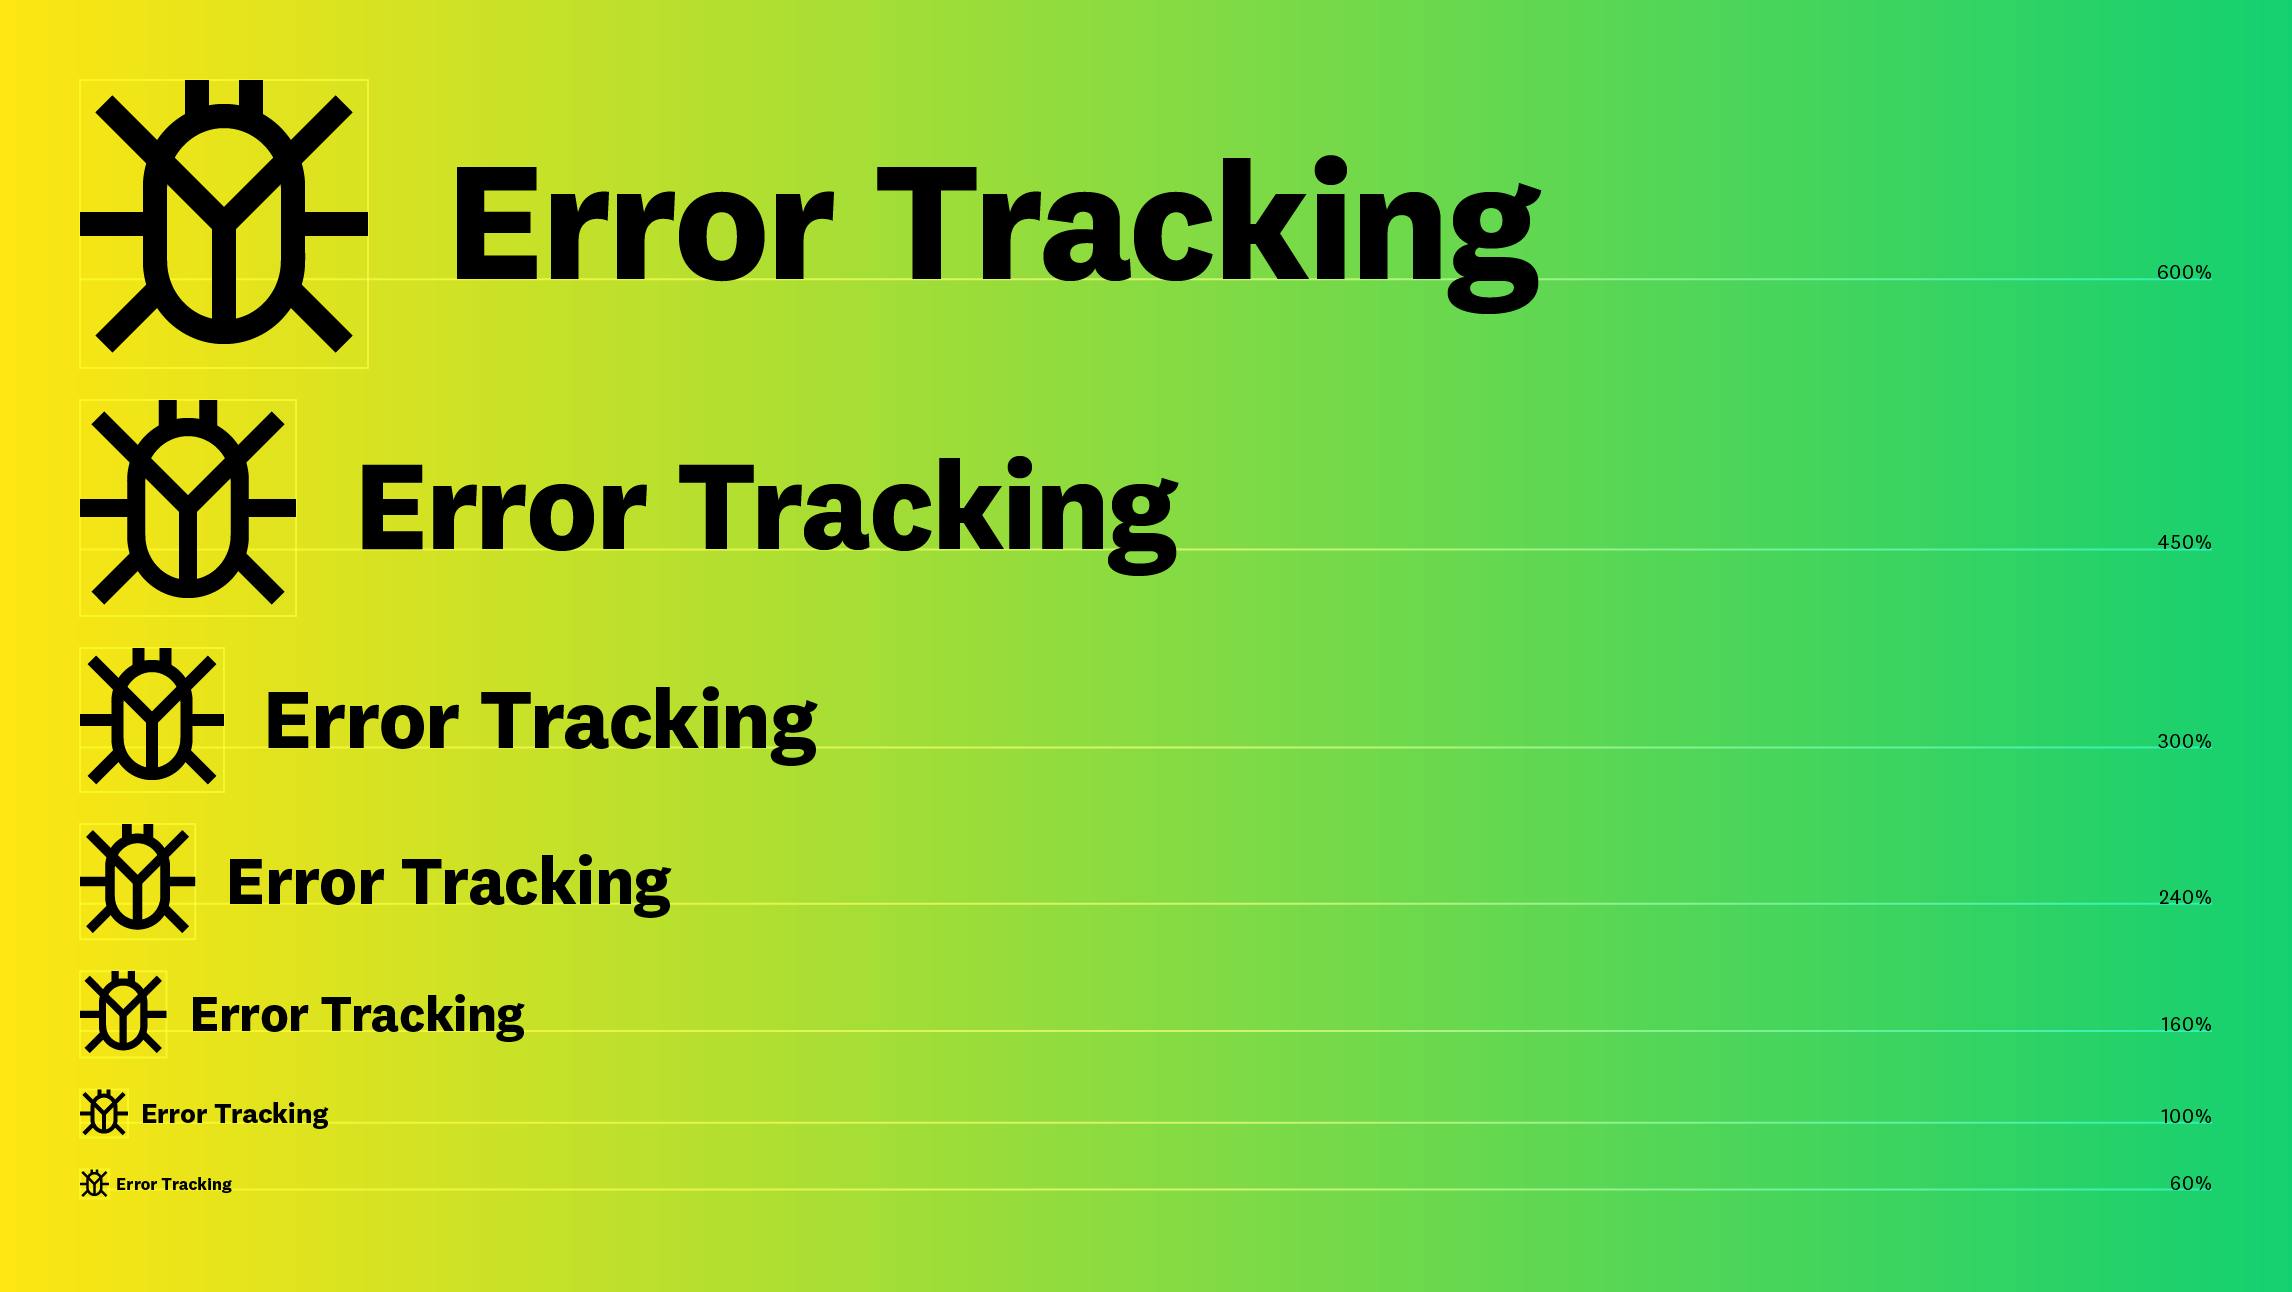 Displayed on a bright green and yellow gradient background, the error tracking icon- a vertically oriented oval, with six legs and two small antenae following the icon grid guidelines- and the text 'Error Tracking' are displayed in rows. Each row decreasing in size to showcase the flexibility and legibility of the icons.